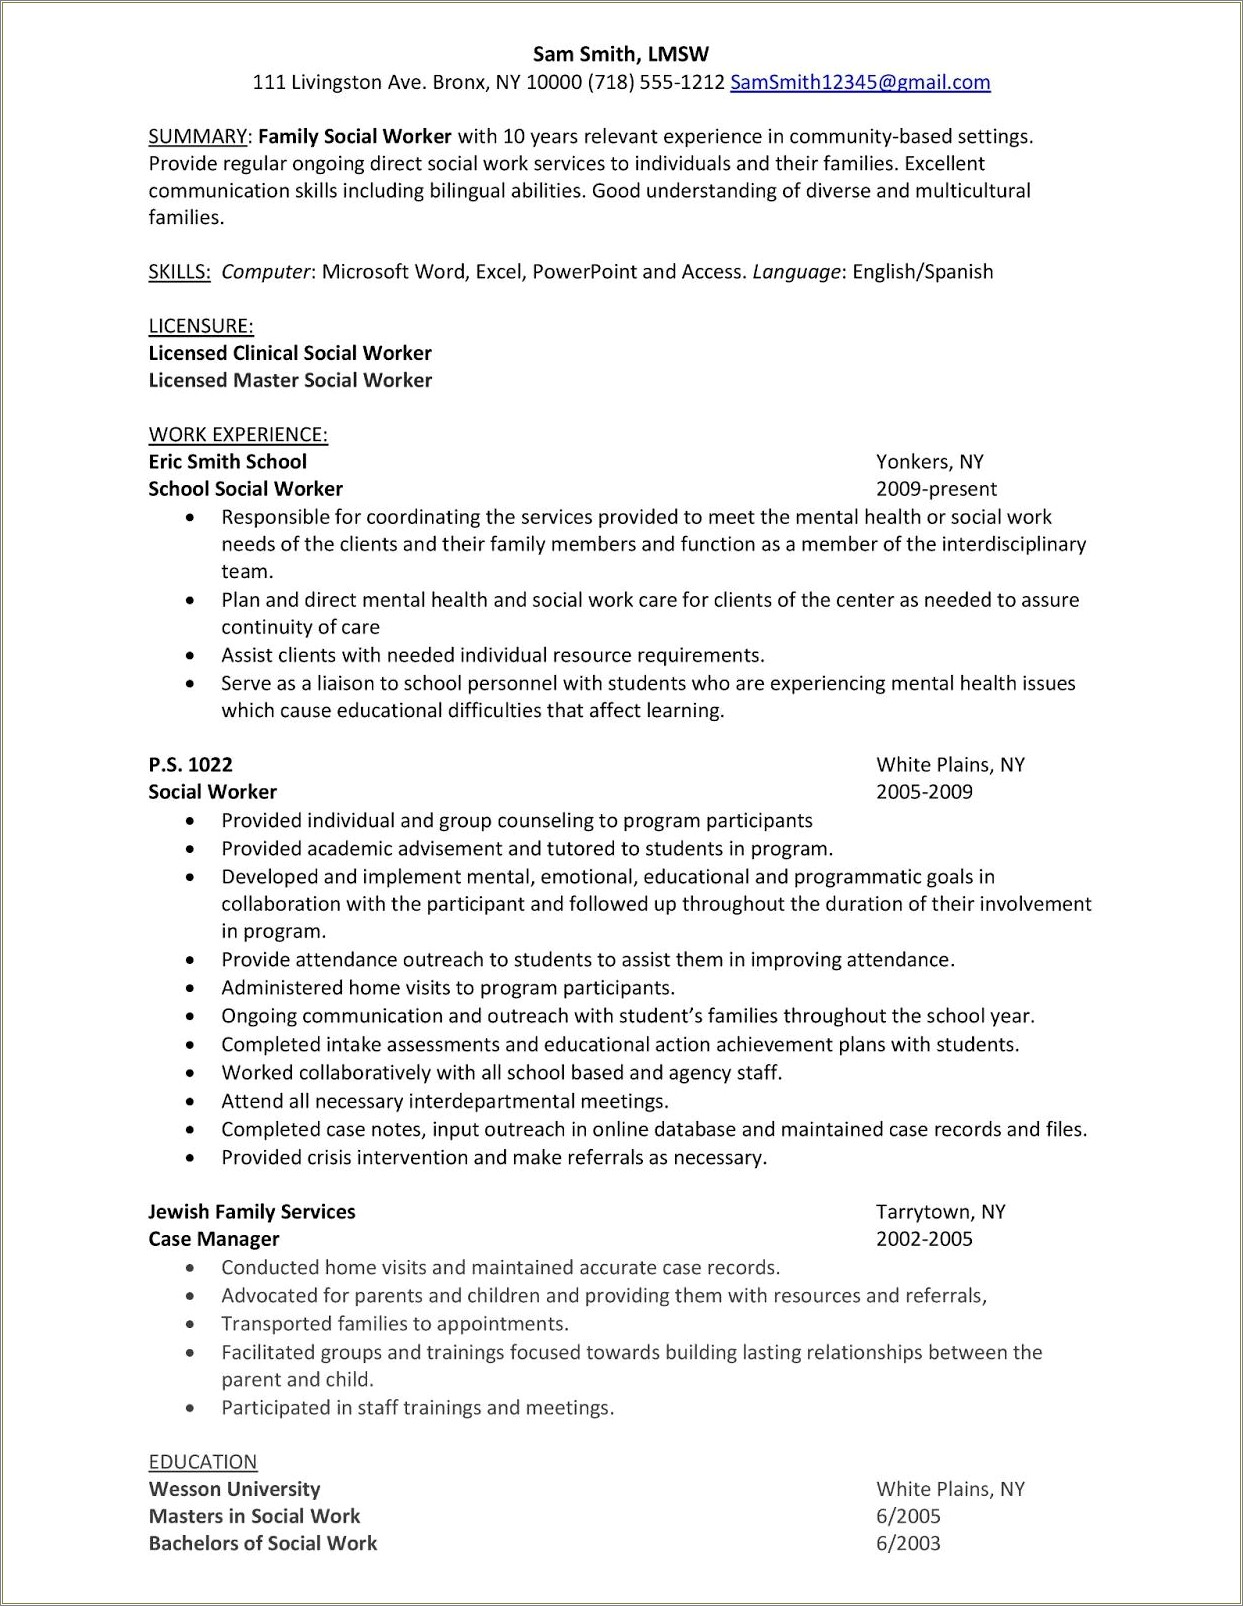 Free Sample Resume Cgild Protective Services Manager Bilingual